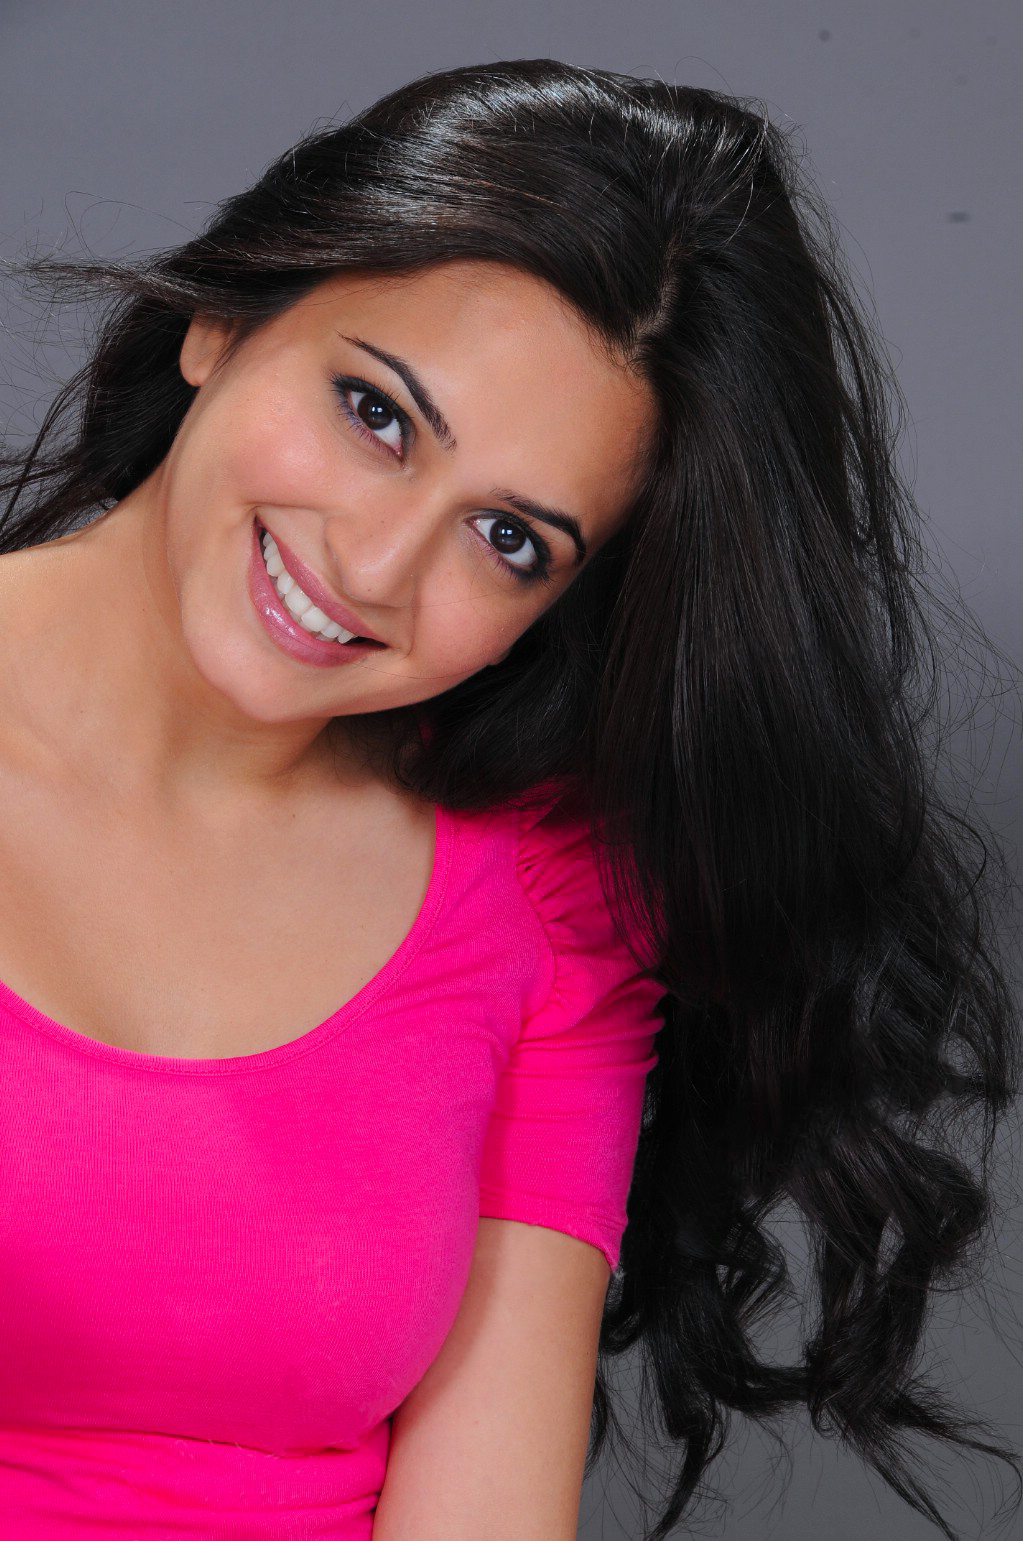 Kriti Kharbanda Incredible Beauty Showcasing Photoshoot In Pink Top And Blue Jeans South